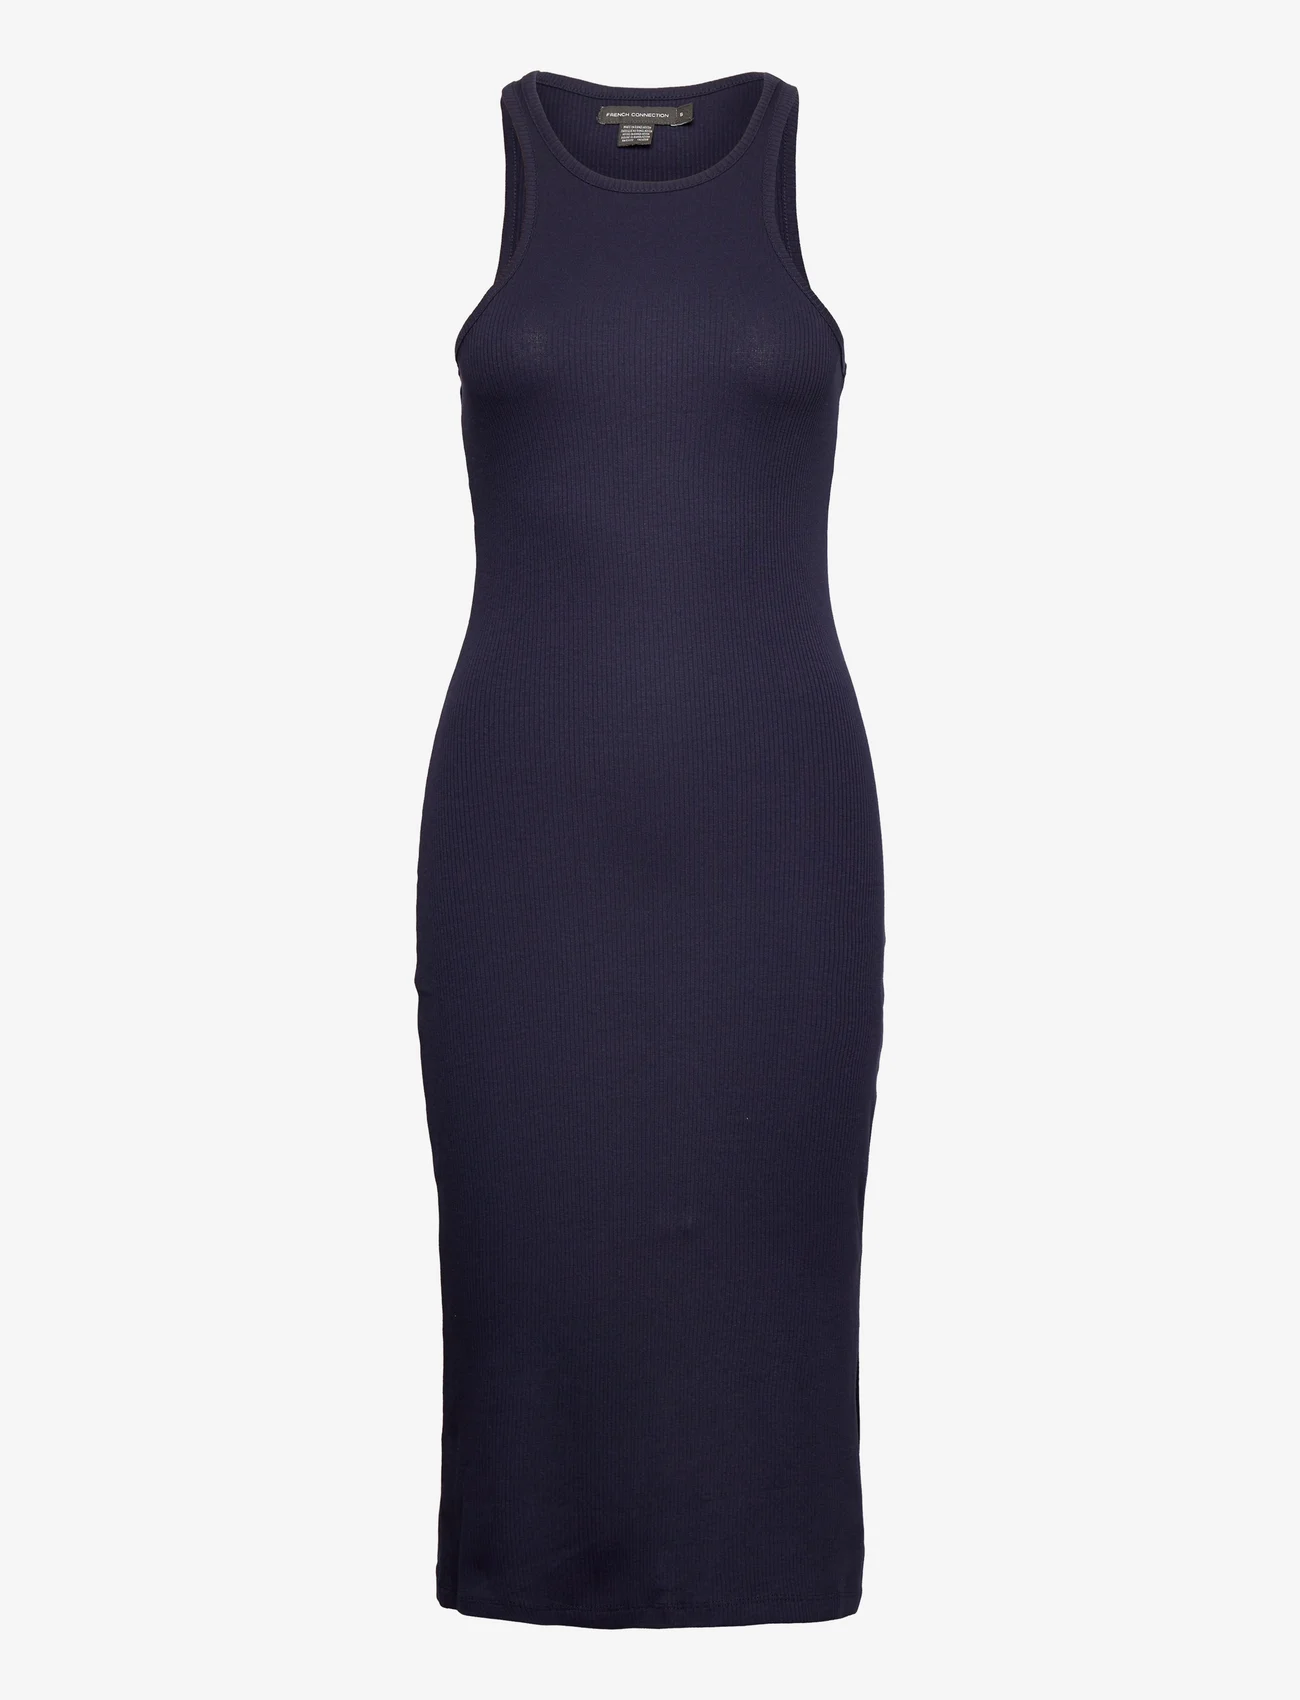 French Connection - RACER M - t-shirt dresses - dark navy - 0